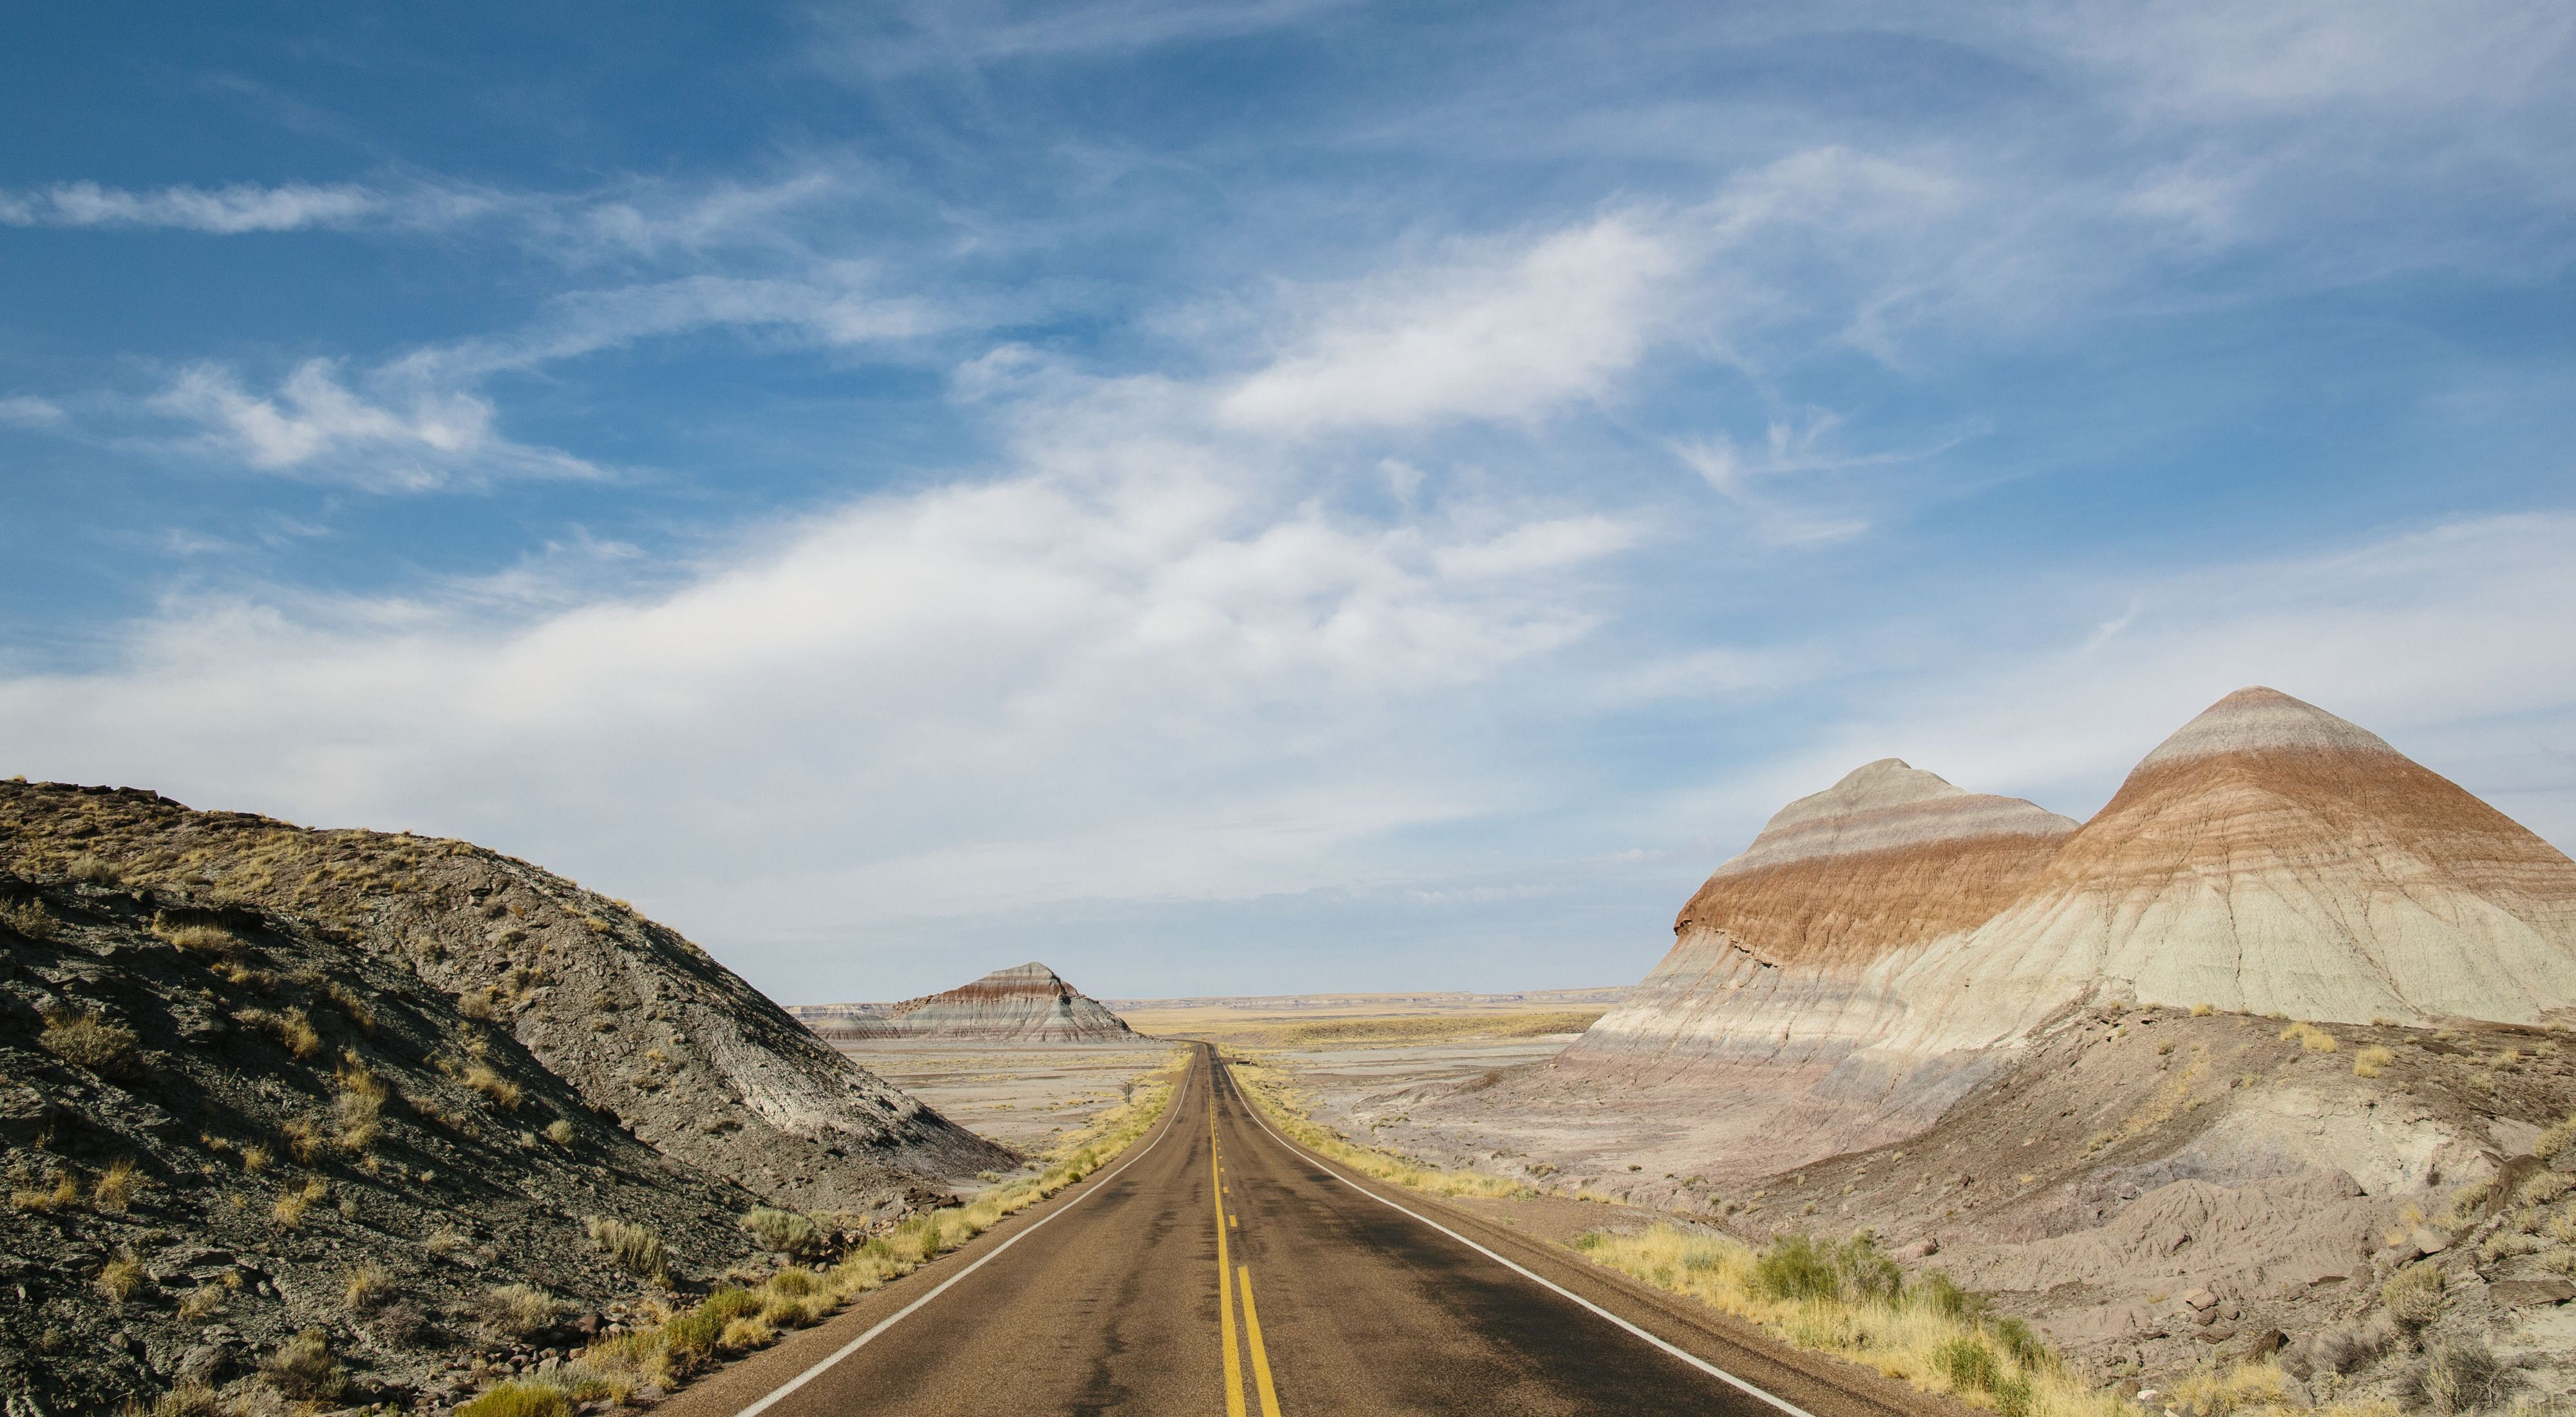 A view of the road through Petrified Forest National Park in Arizona.